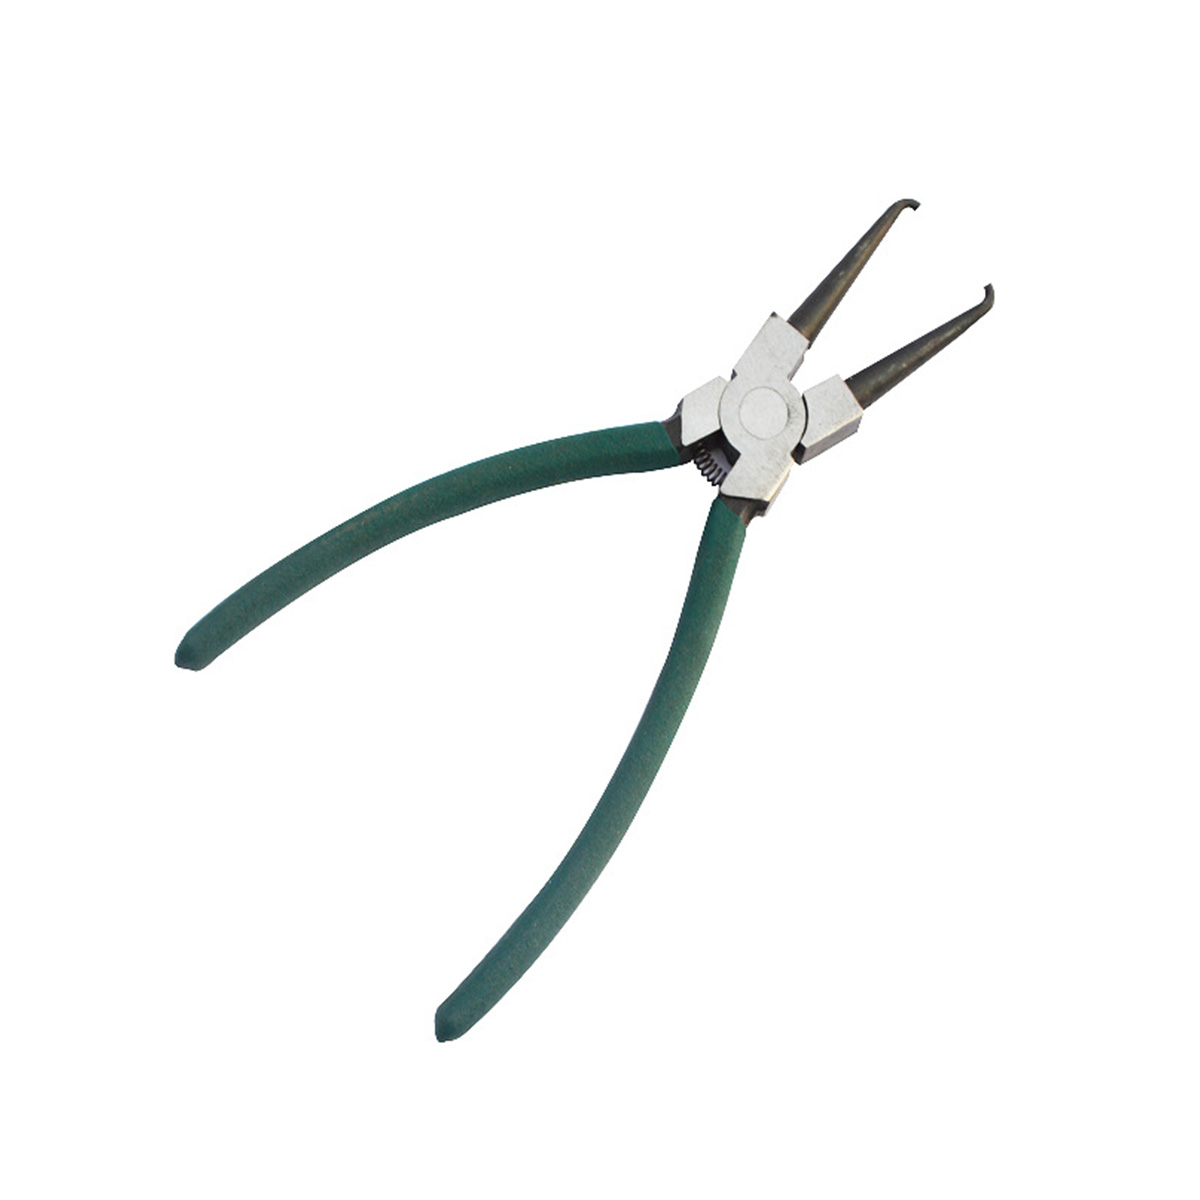 225mm-Fuel-Line-Pliers-Petrol-Clip-Pipe-Hose-Release-Disconnect-Removal-Tool-Kit-1612837